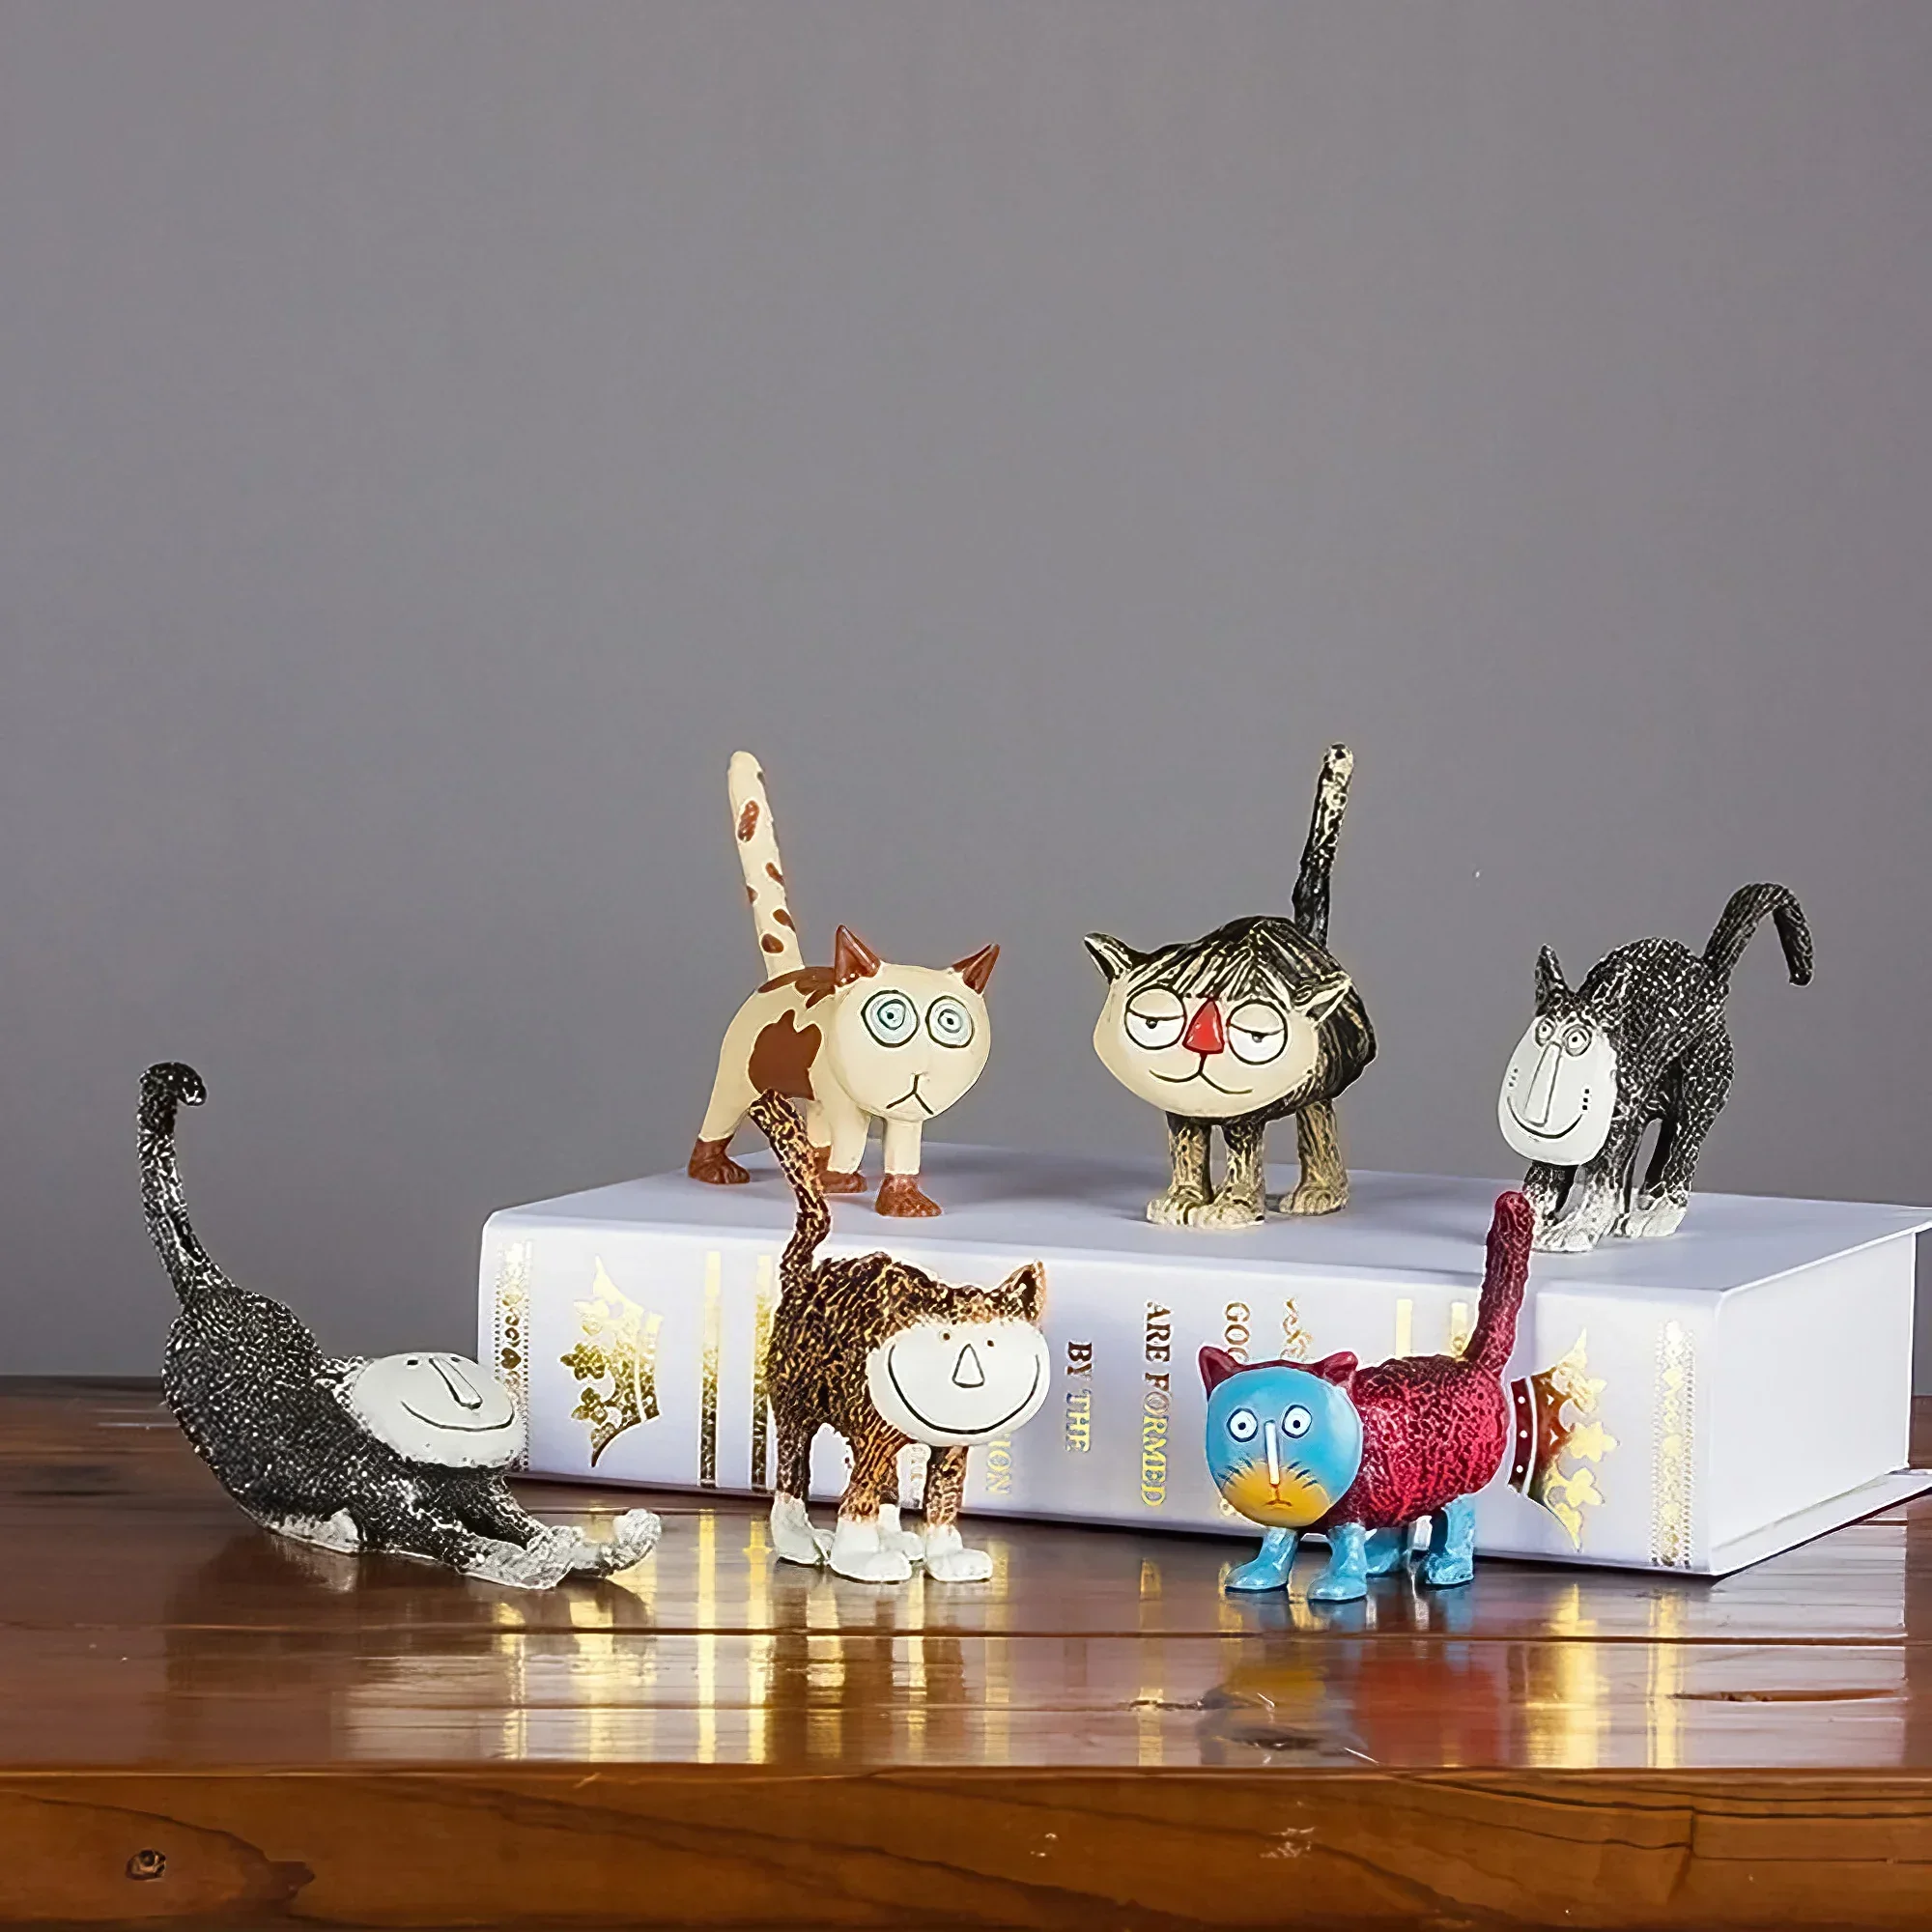 

One Set of Original Design Cat Figurines Creative CatCat Models Cartoon Kitty Ornaments Home Gift Limited Collections